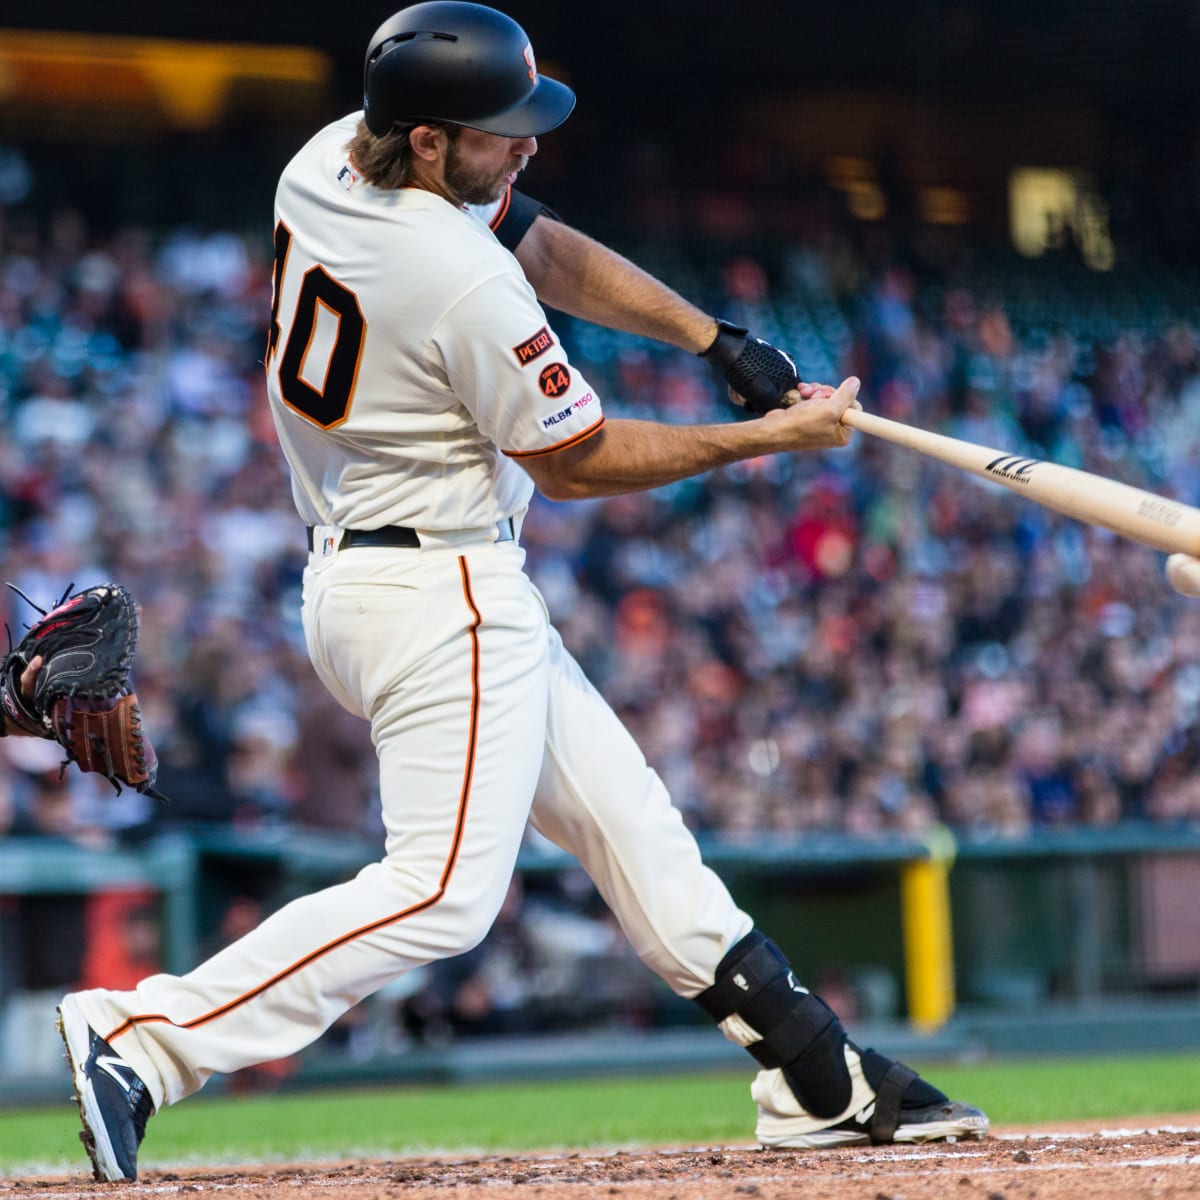 Why Giants didn't keep Madison Bumgarner in San Francisco forever